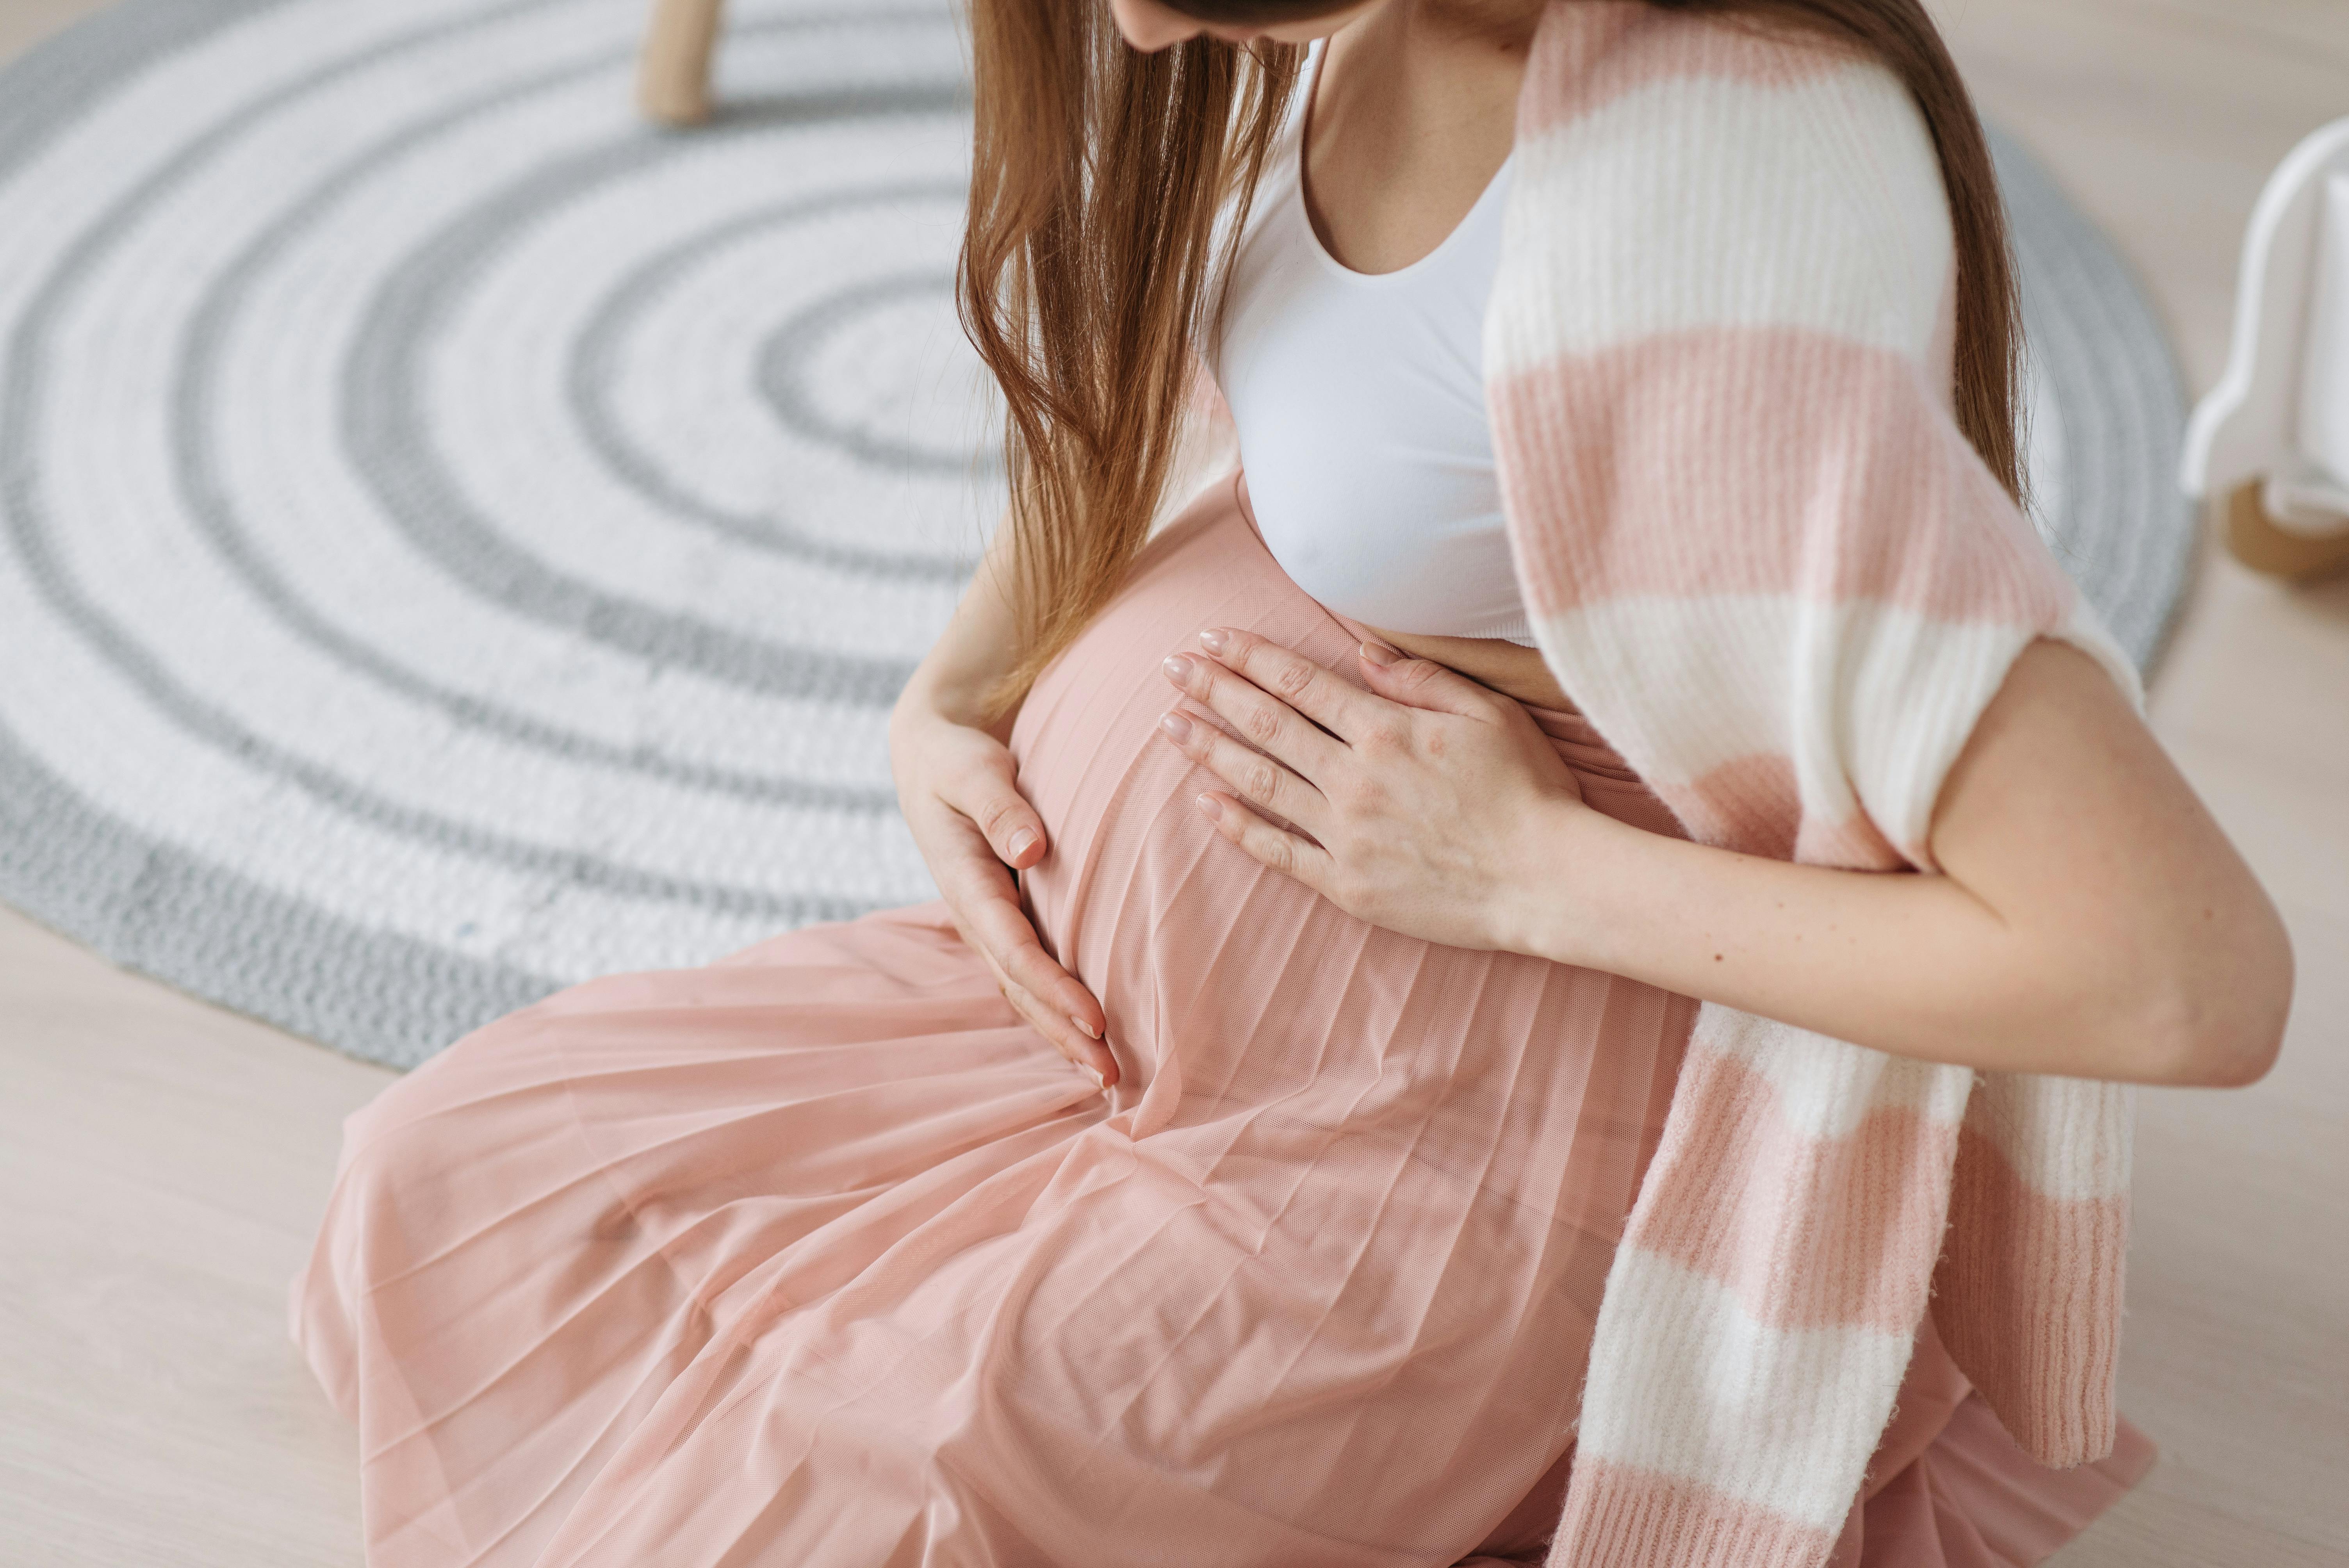 A pregnant woman holding her belly while seated | Source: Pexels